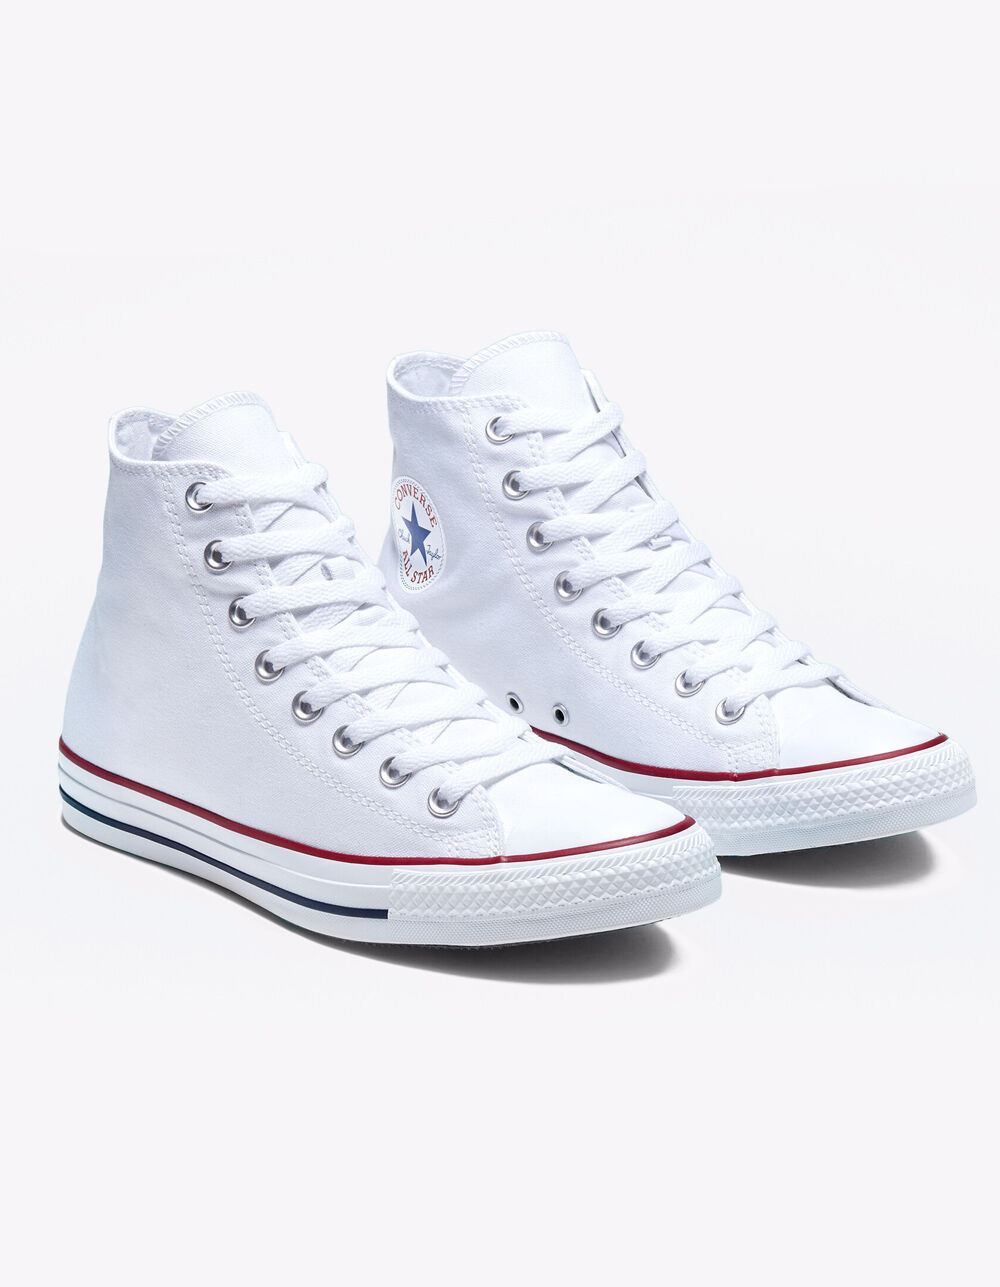 padle Legende lighed CONVERSE Chuck Taylor All Star White High Top Shoes - WHITE | Tillys